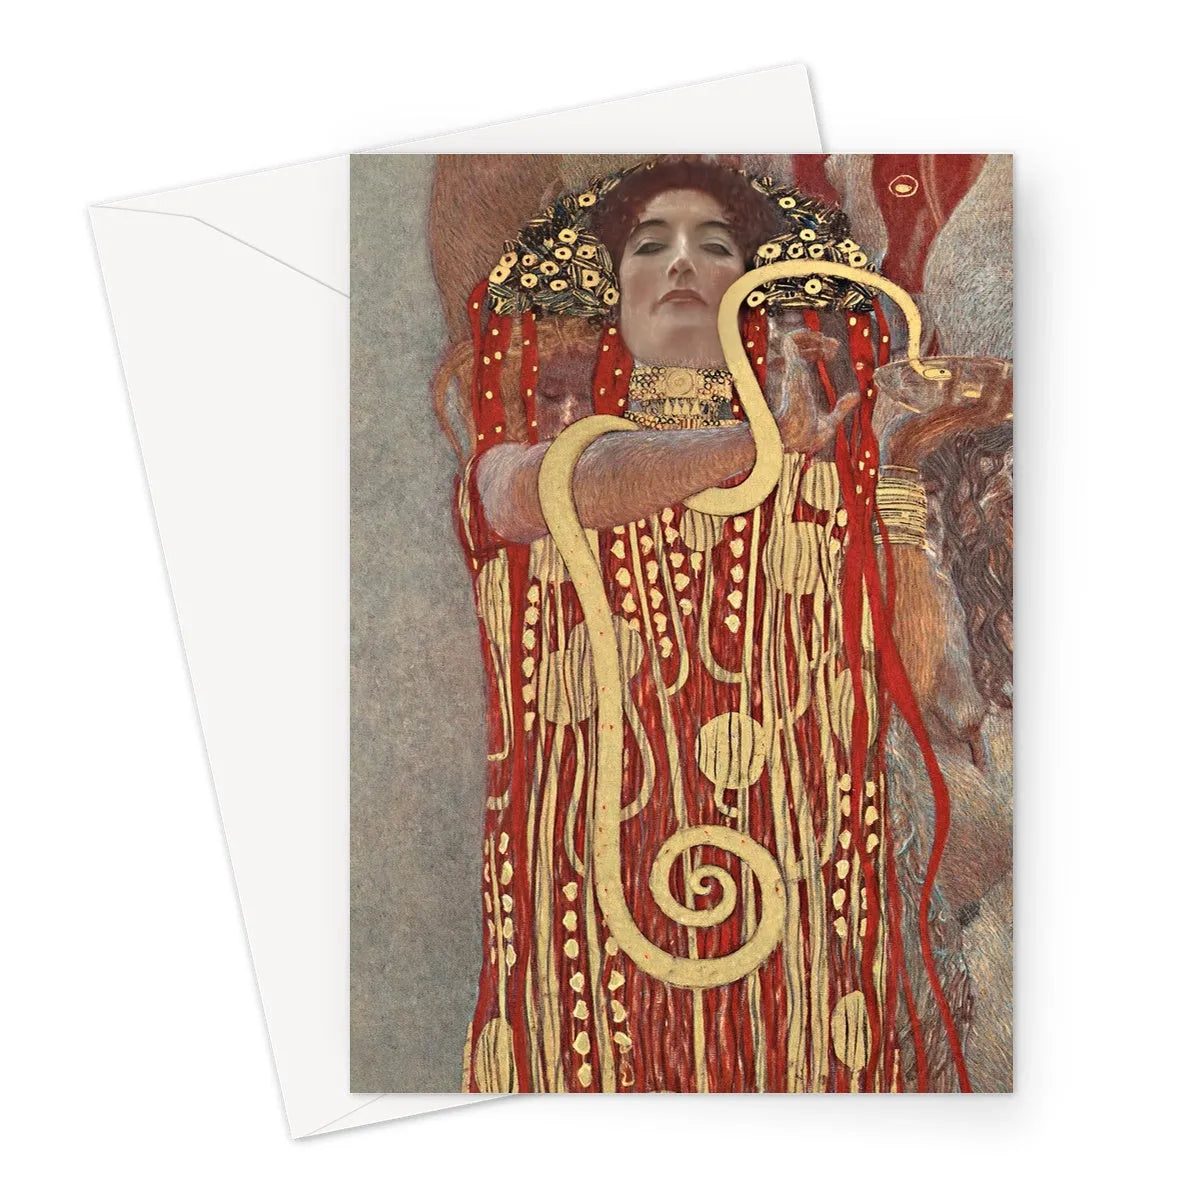 Hygieia By Gustav Klimt Greeting Card - A5 Portrait / 1 Card - Greeting & Note Cards - Aesthetic Art